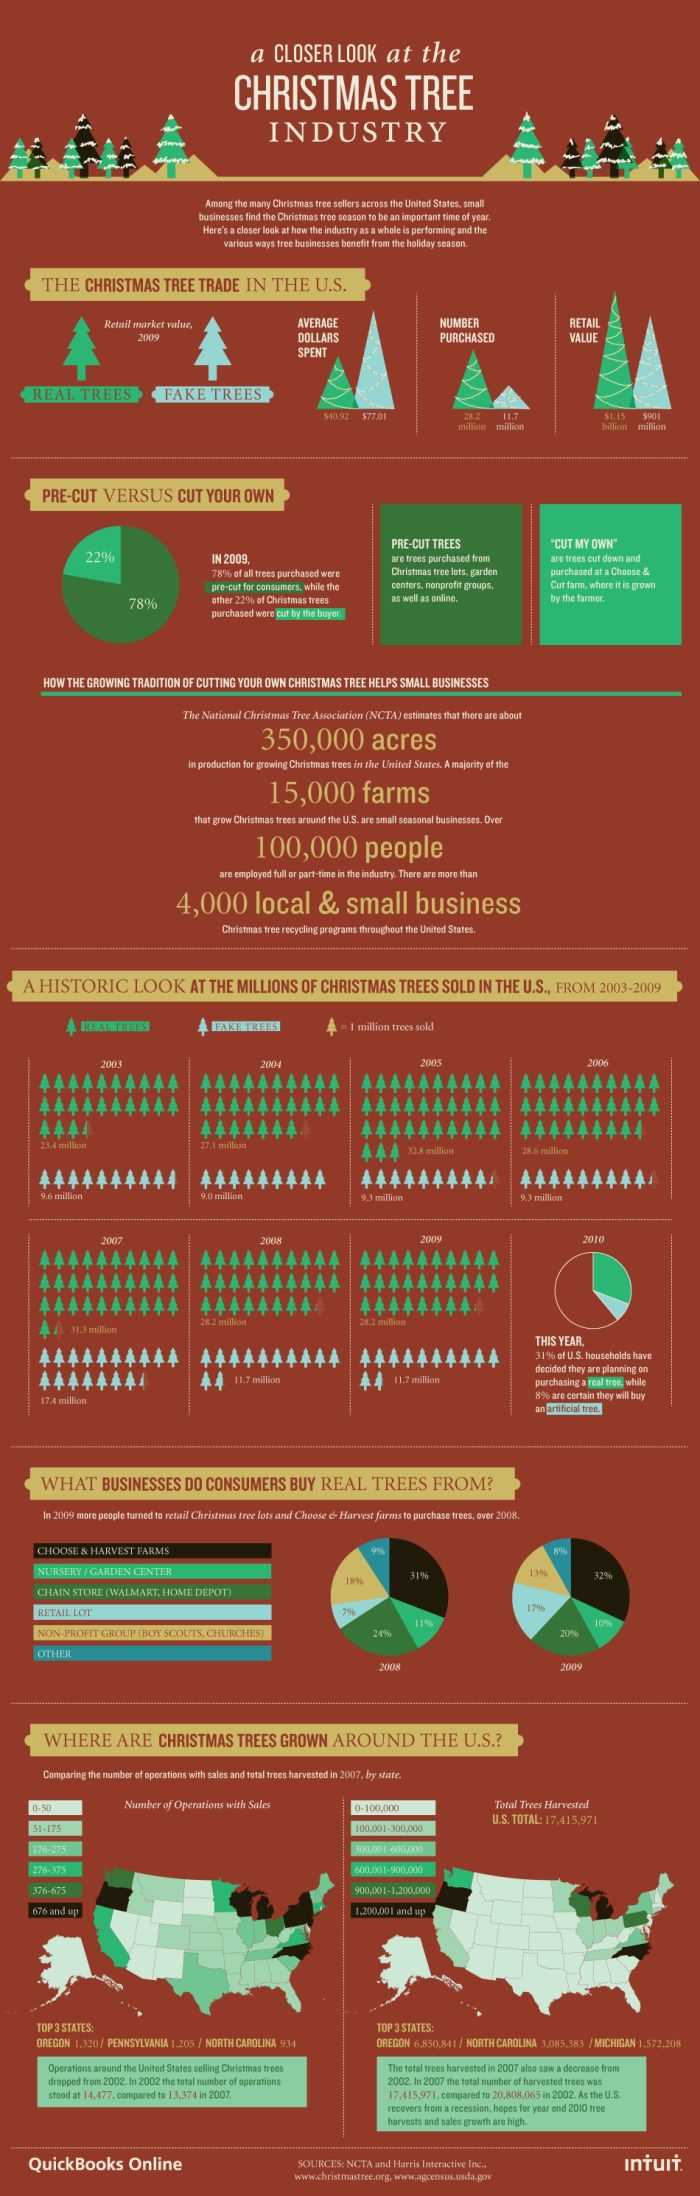 A Closer Look at the Christmas Tree Industry (infographic)